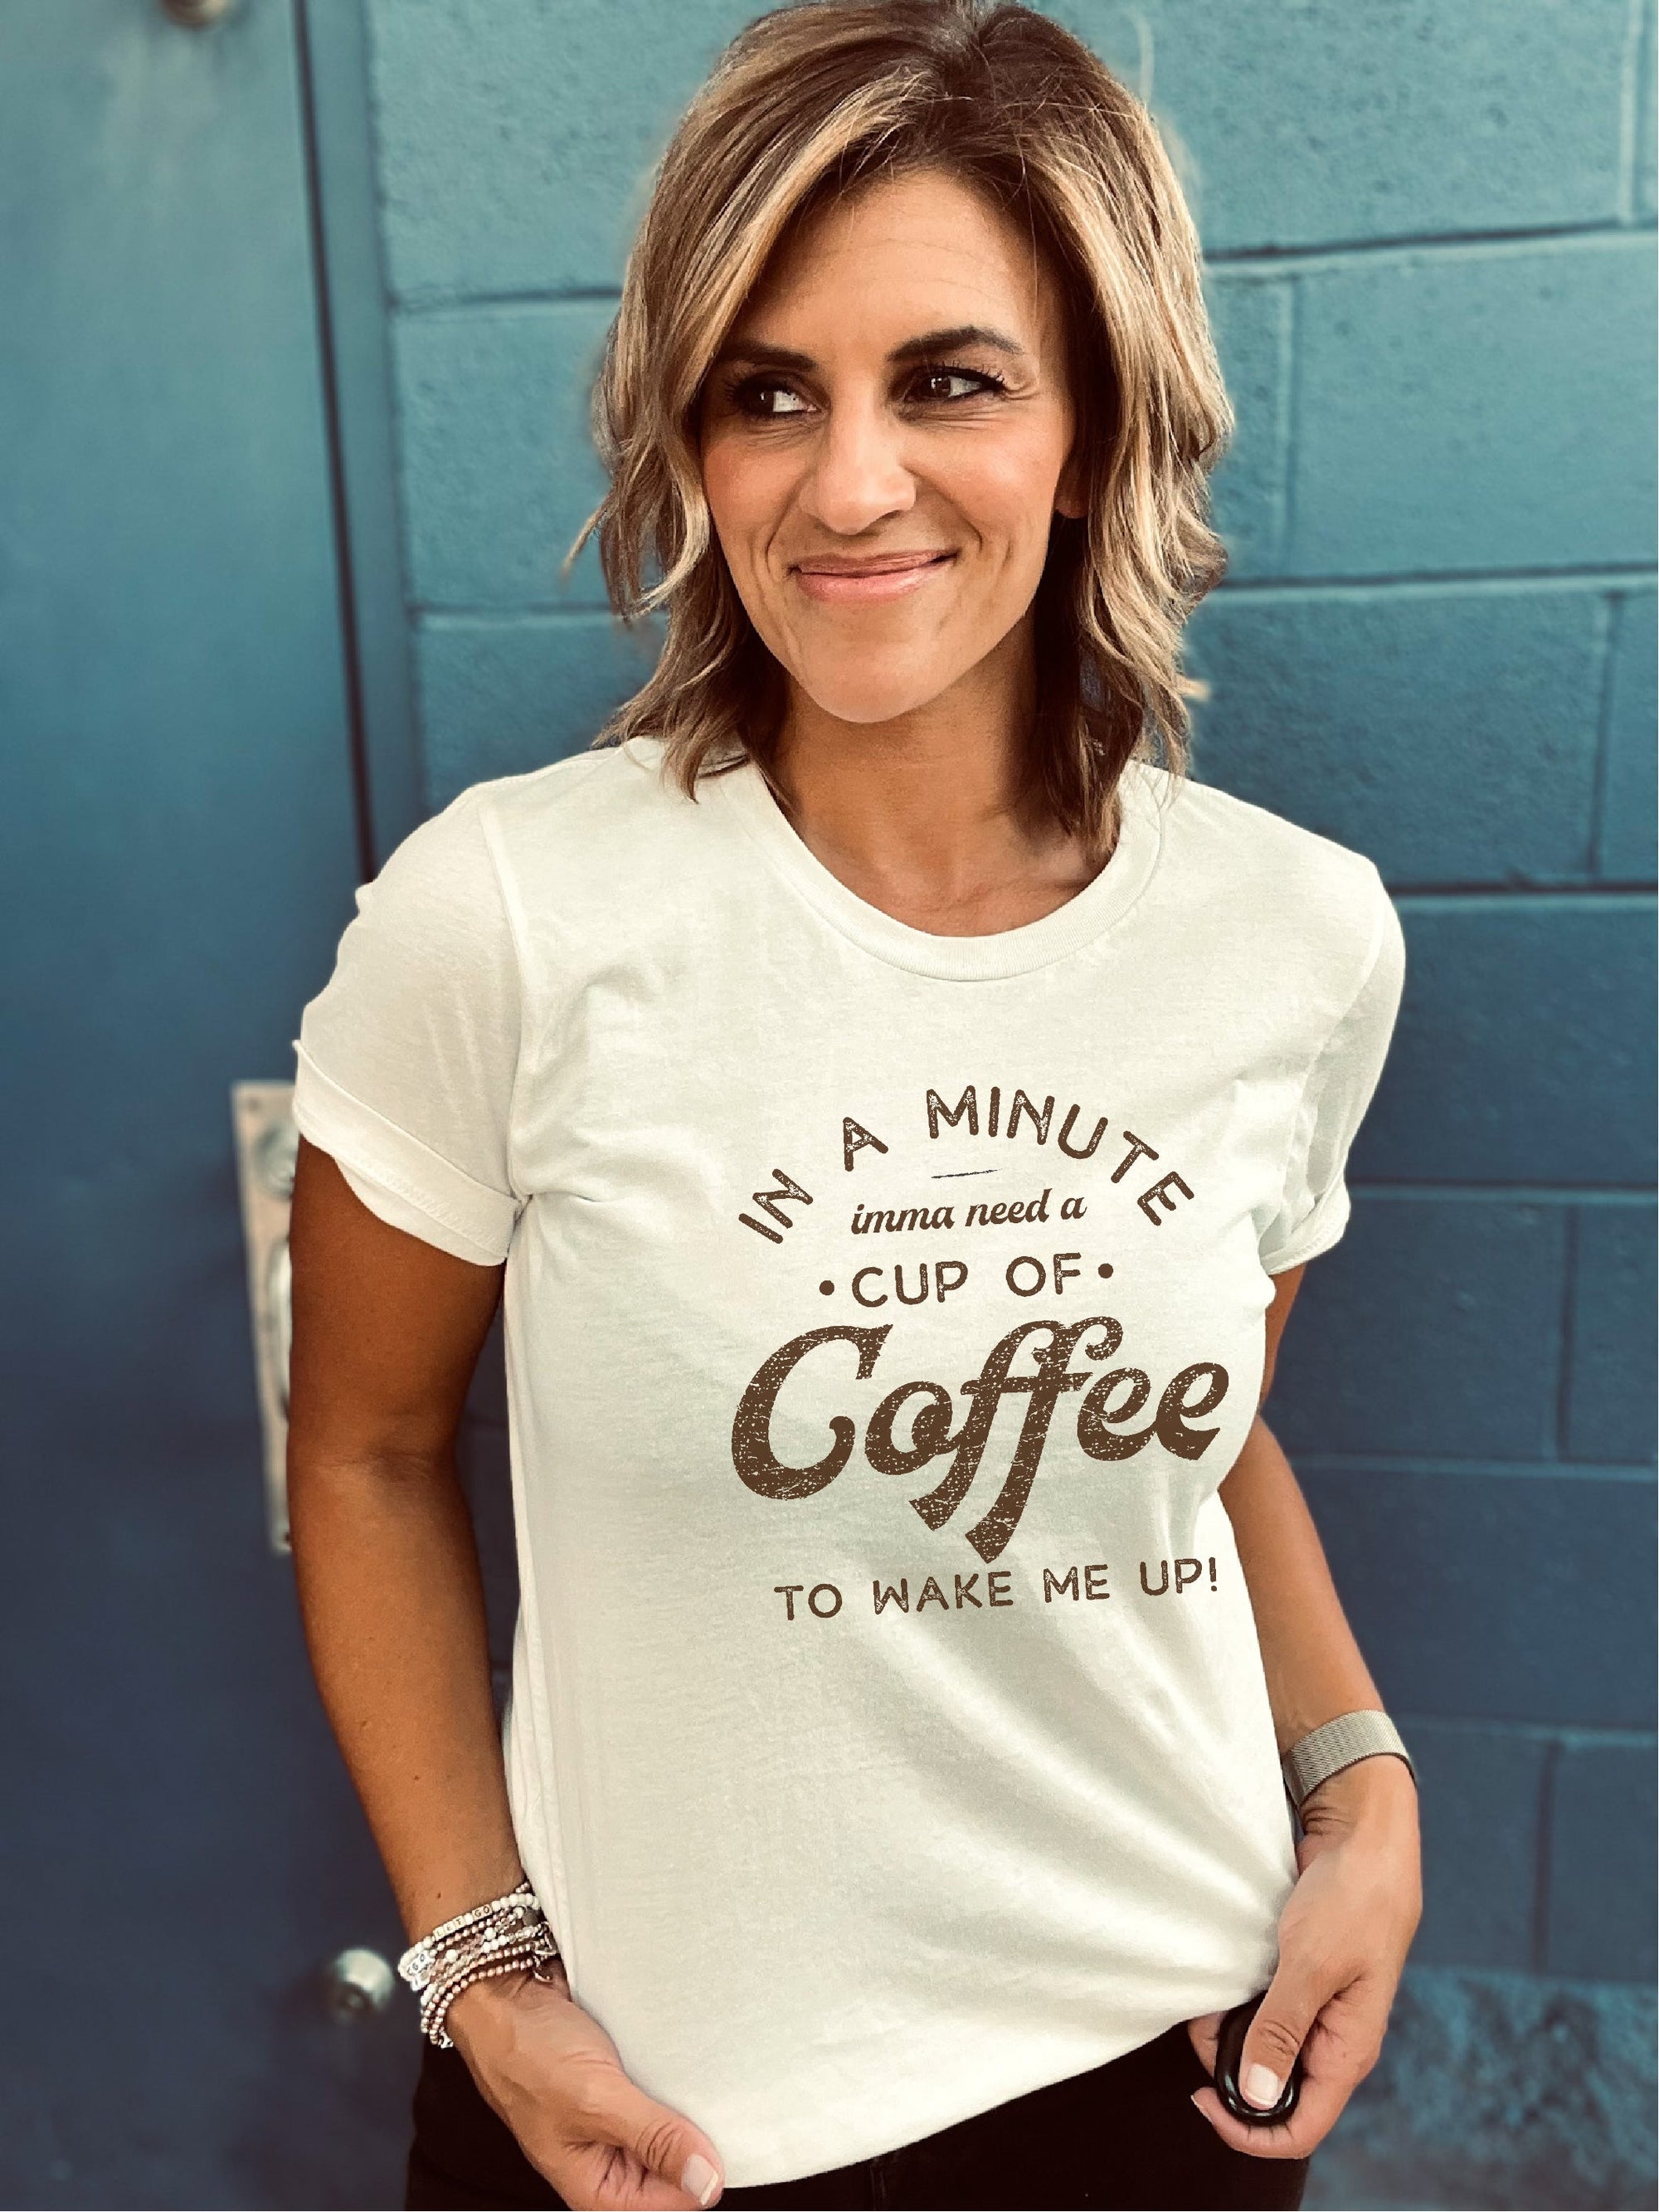 In a minute imma need a cup of coffee tee Short sleeve miscellaneous tee Lane seven premium tee mushroom, bella canvas 3001 vintage white 